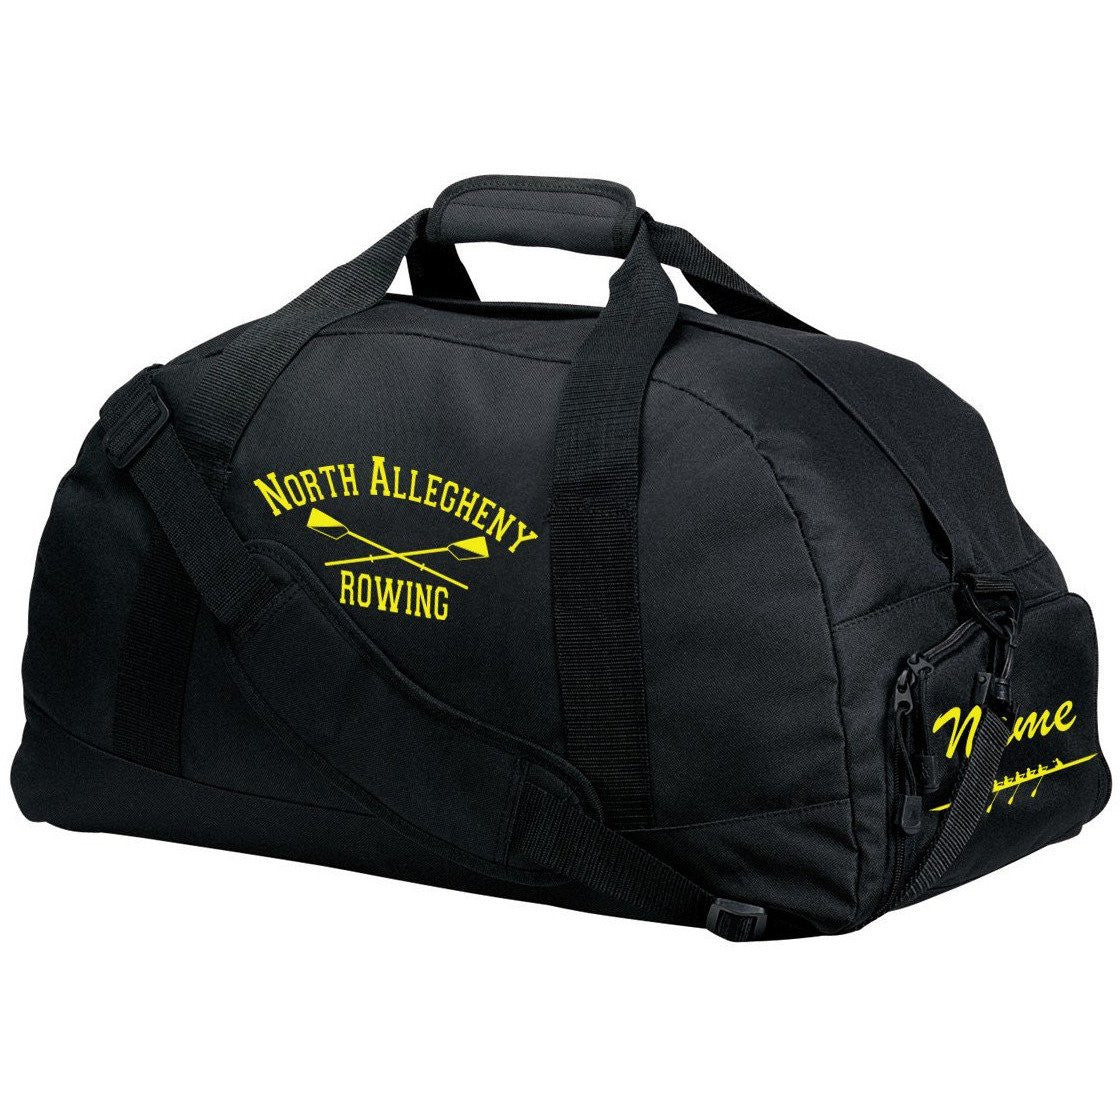 North Allegheny Rowing Race Day Bag